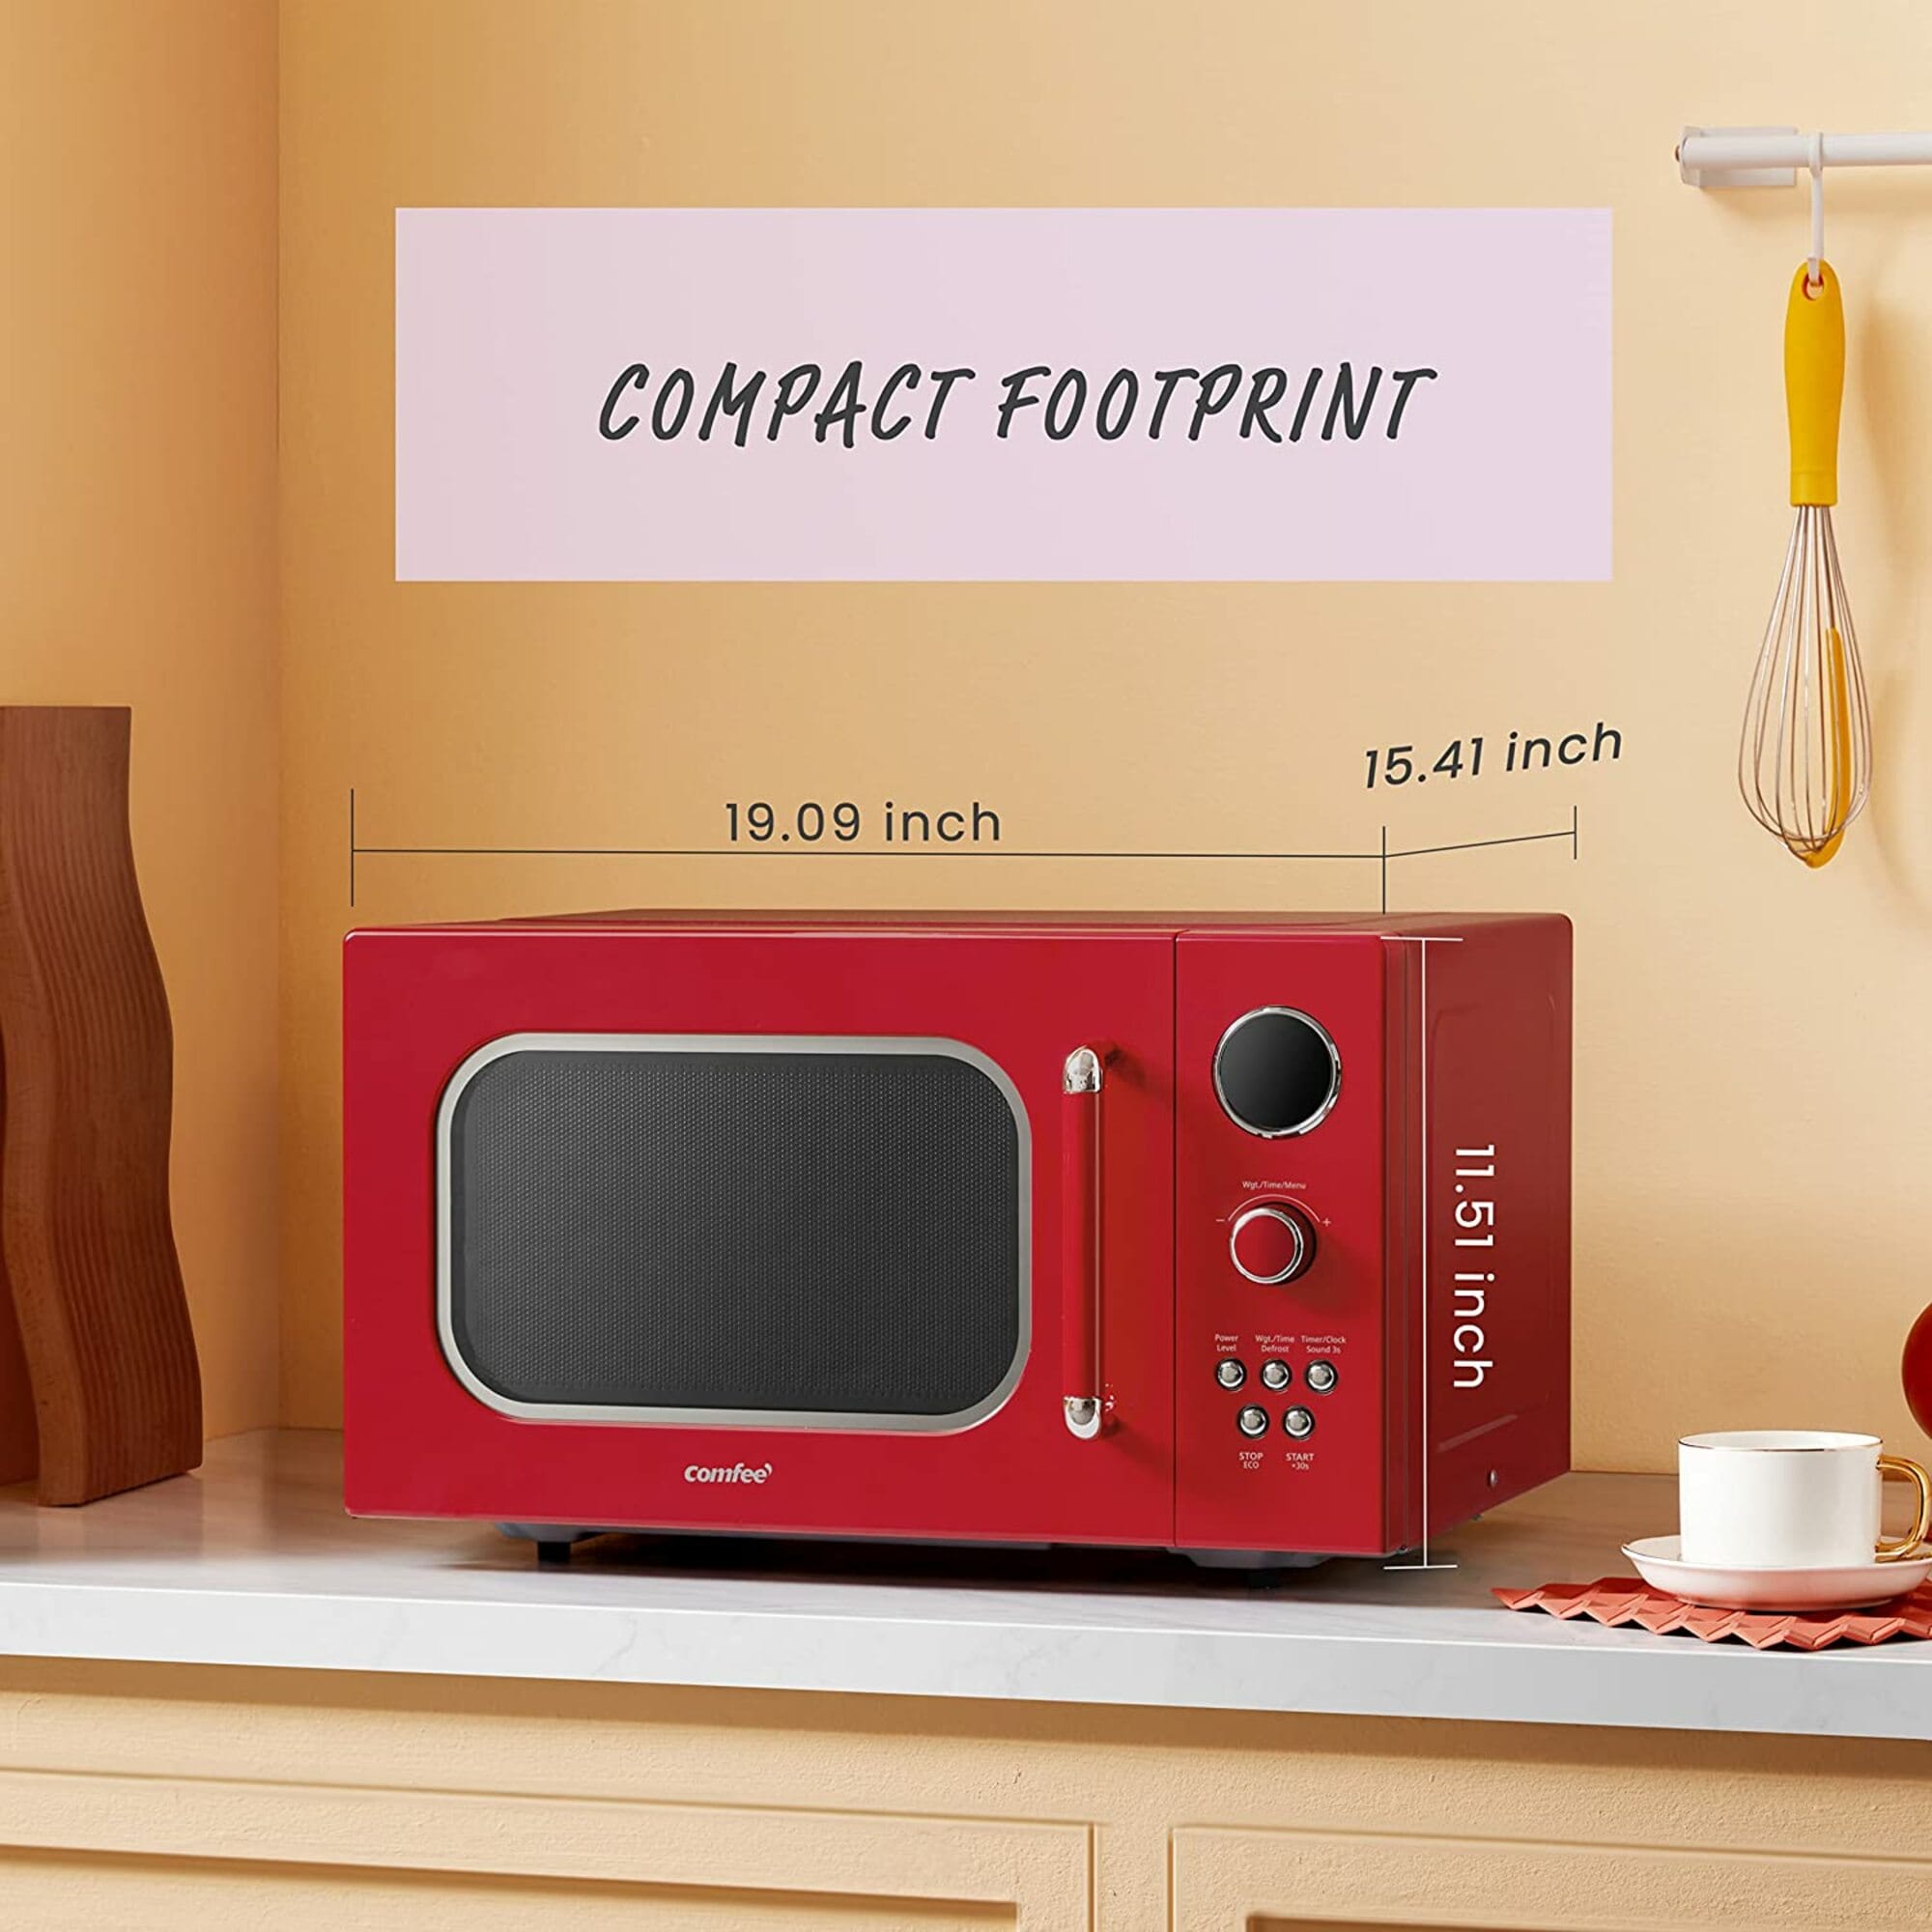 COMFEE' Retro Small Microwave Oven With Compact Size, 9 Preset Menus,  Position-Memory Turntable, Mute Function, Countertop Microwave For Small  Spaces